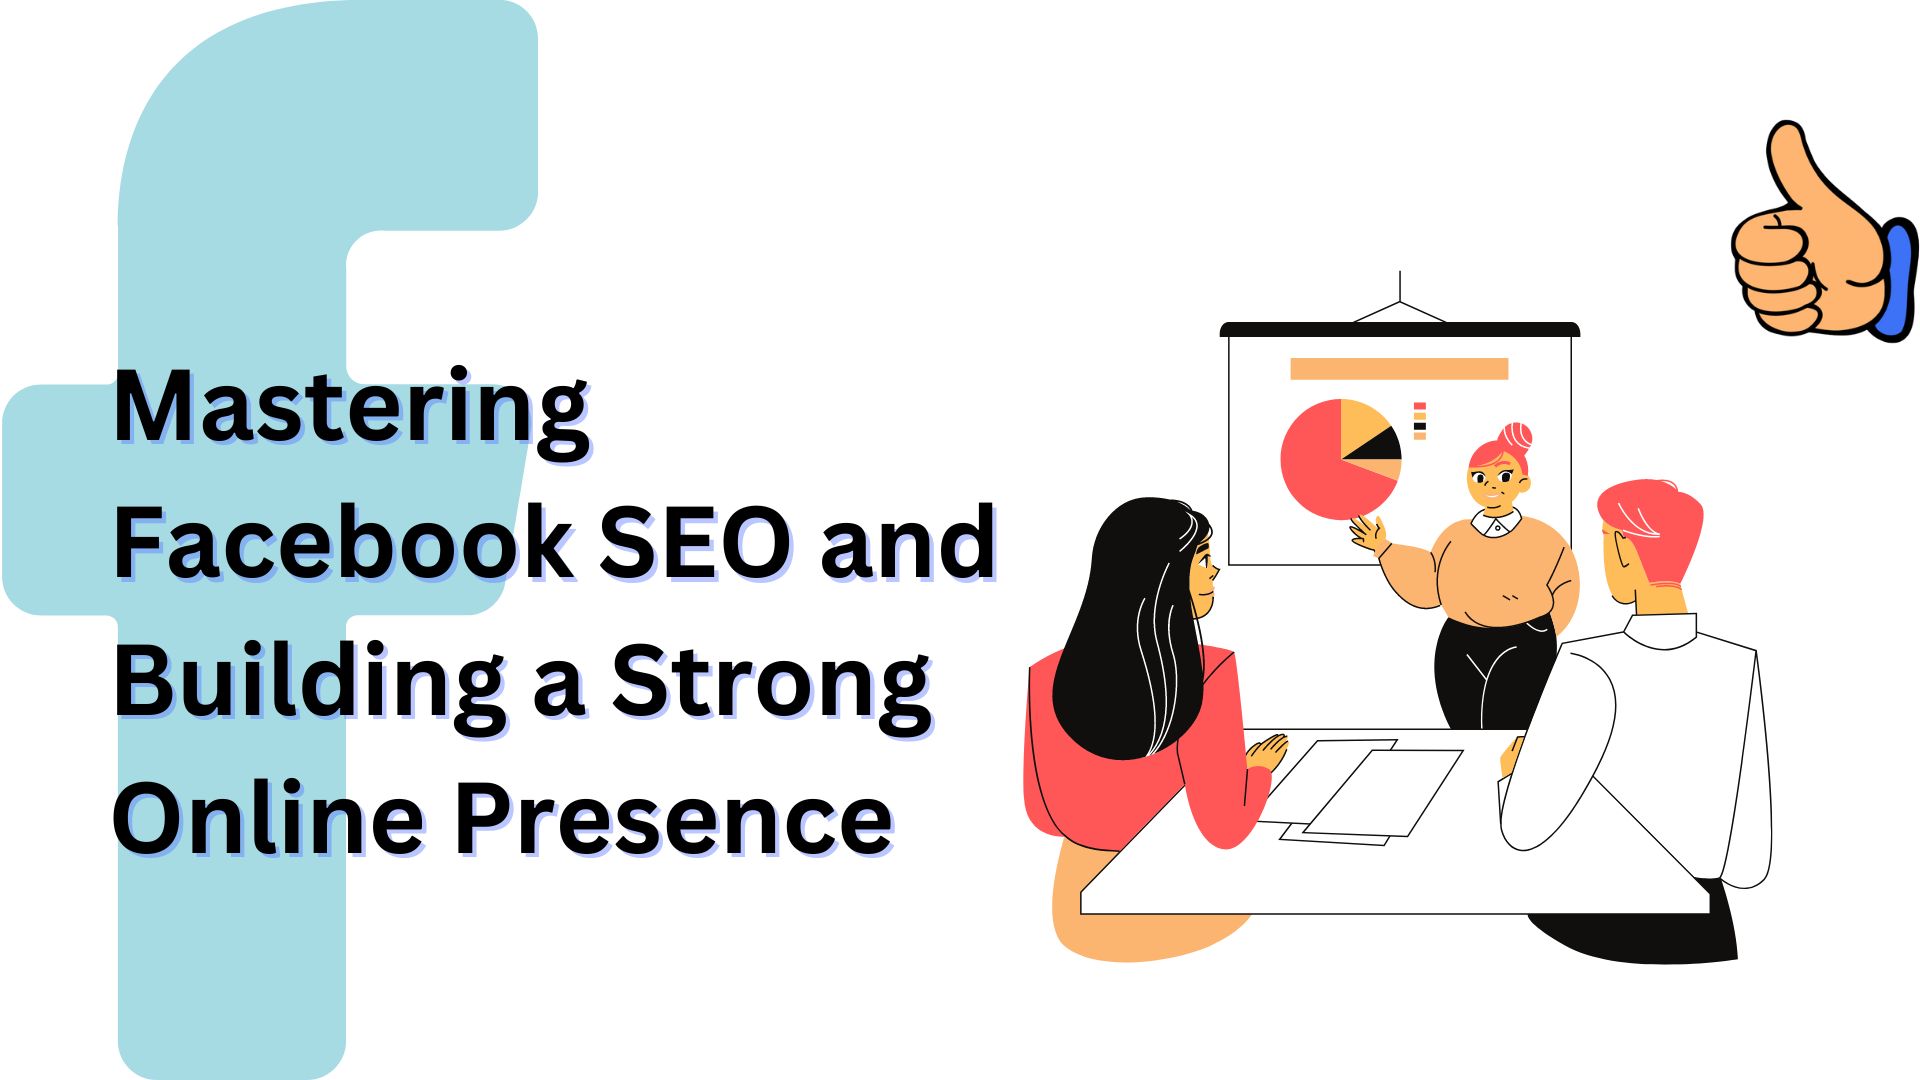 Mastering Facebook SEO and Building a Strong Online Presence